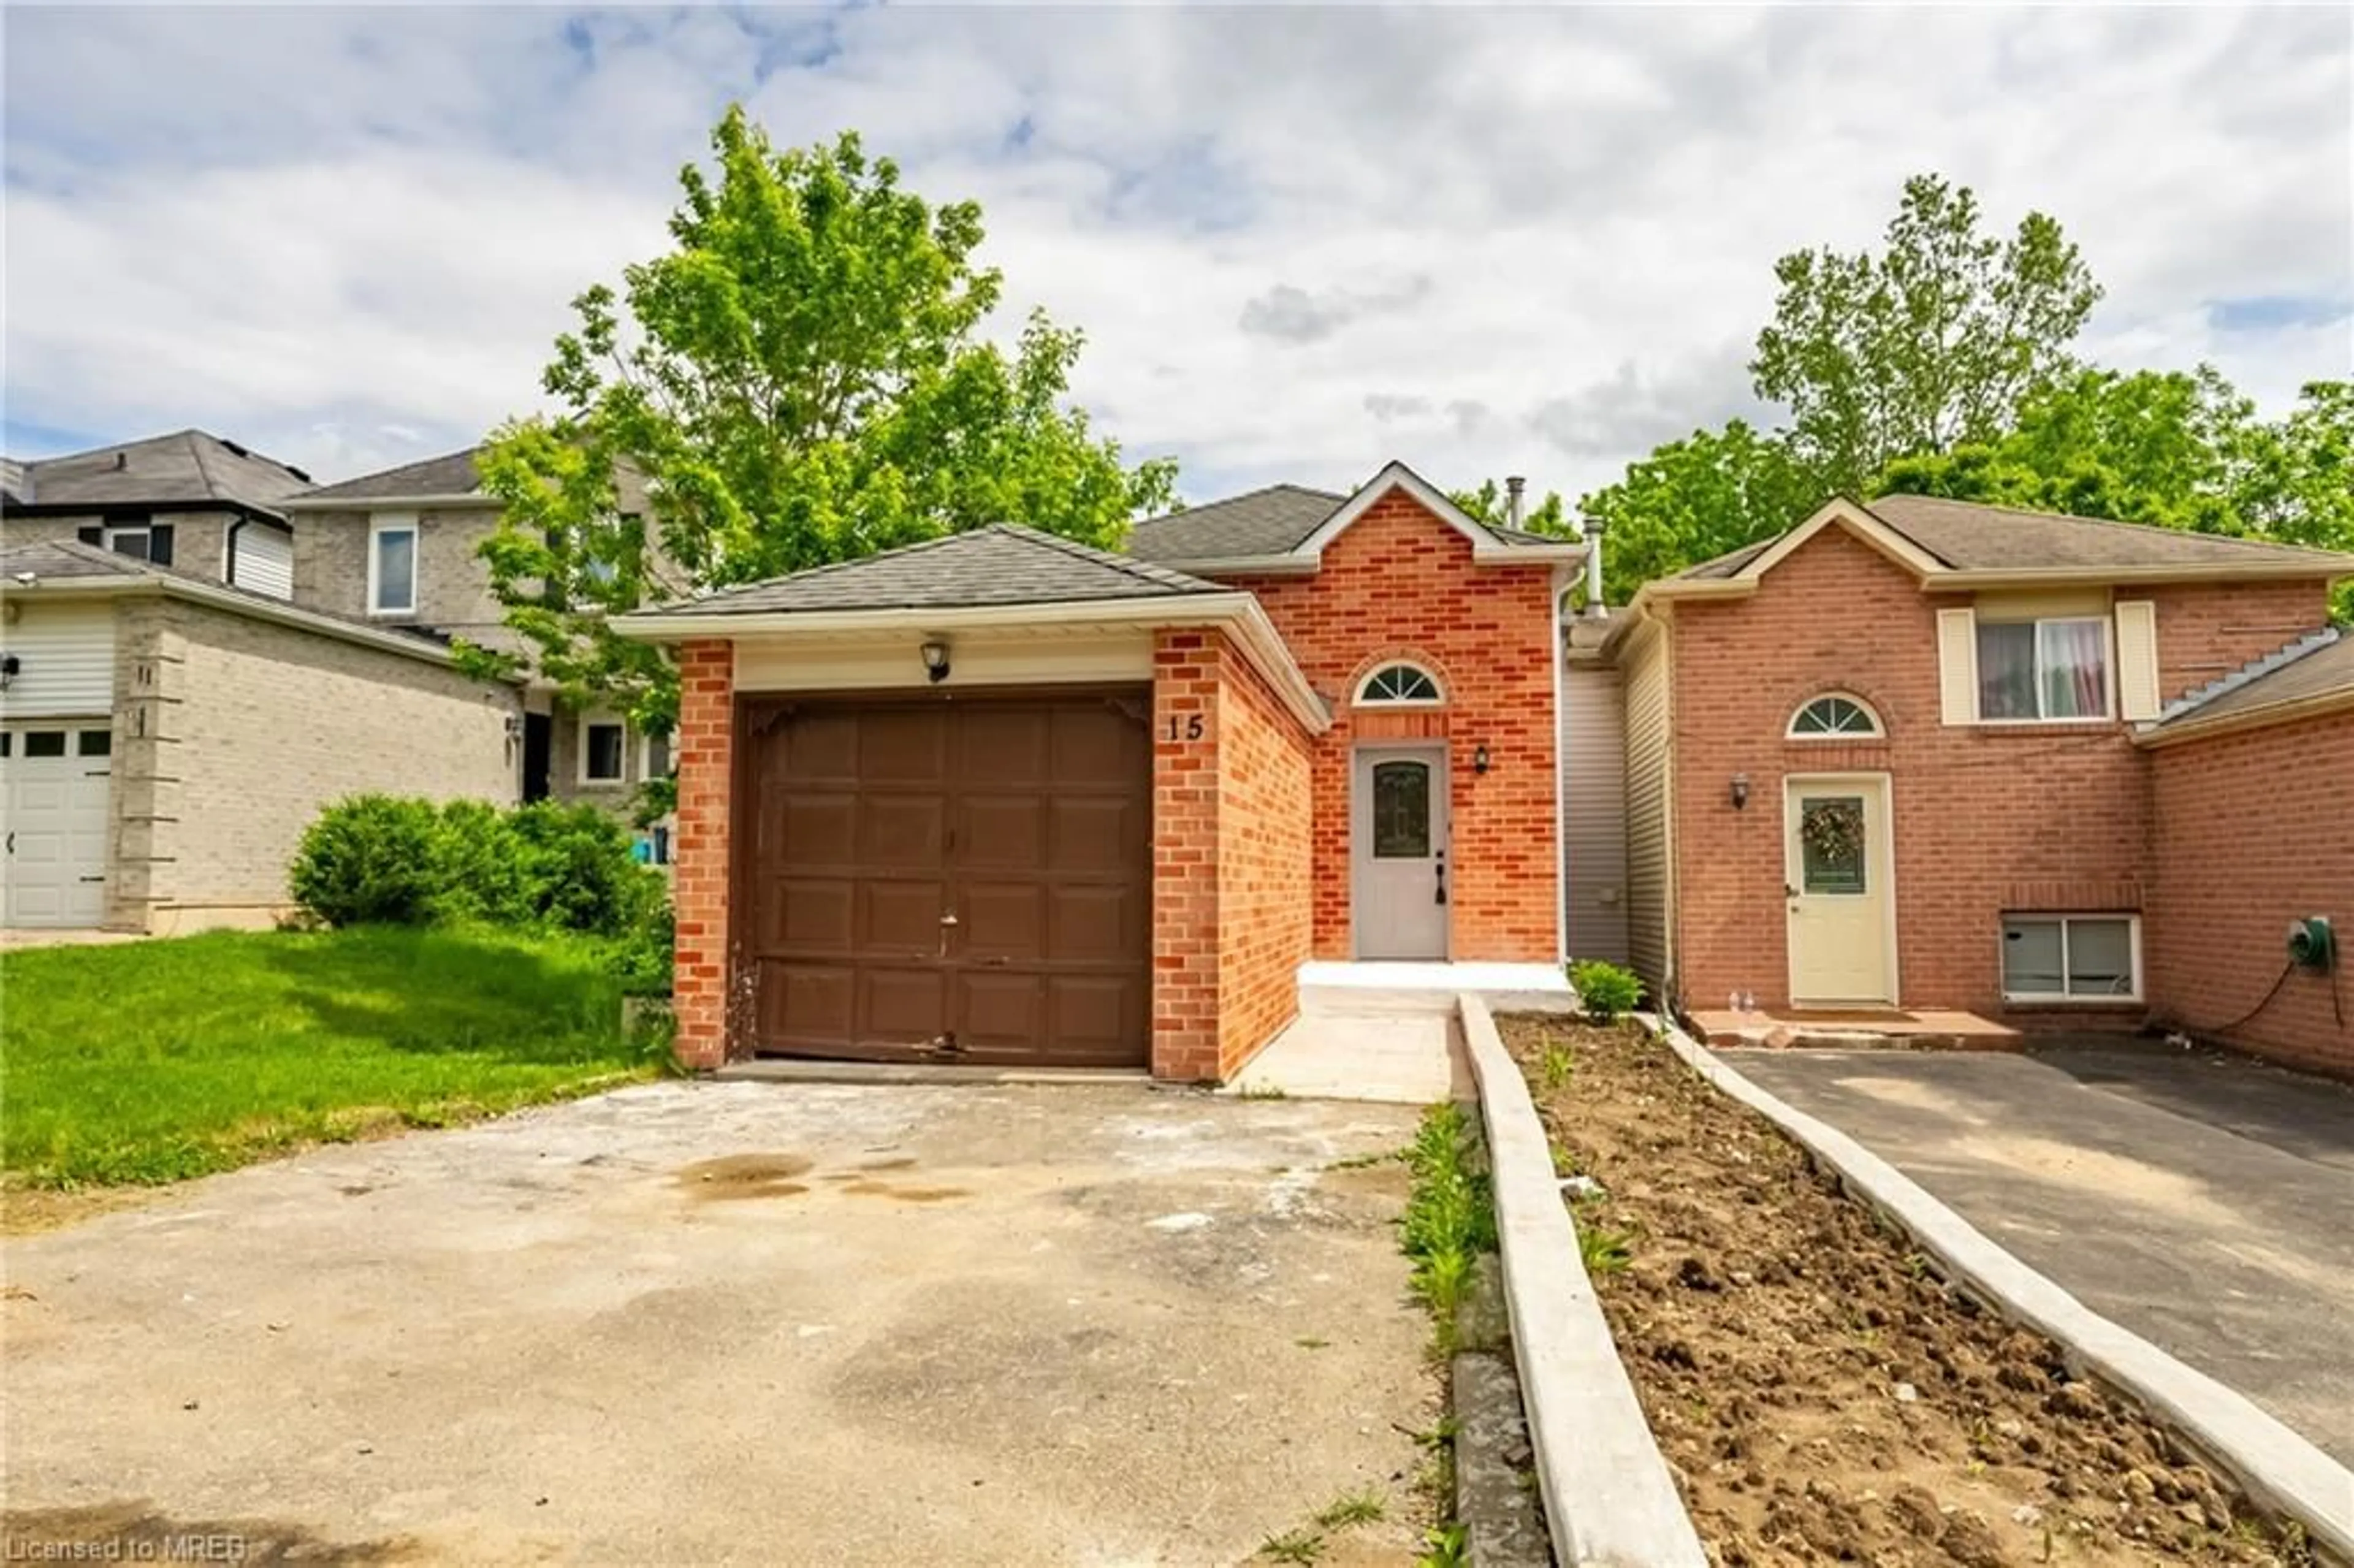 Home with brick exterior material for 15 D'aubigny Rd, Brantford Ontario N3R 6L9